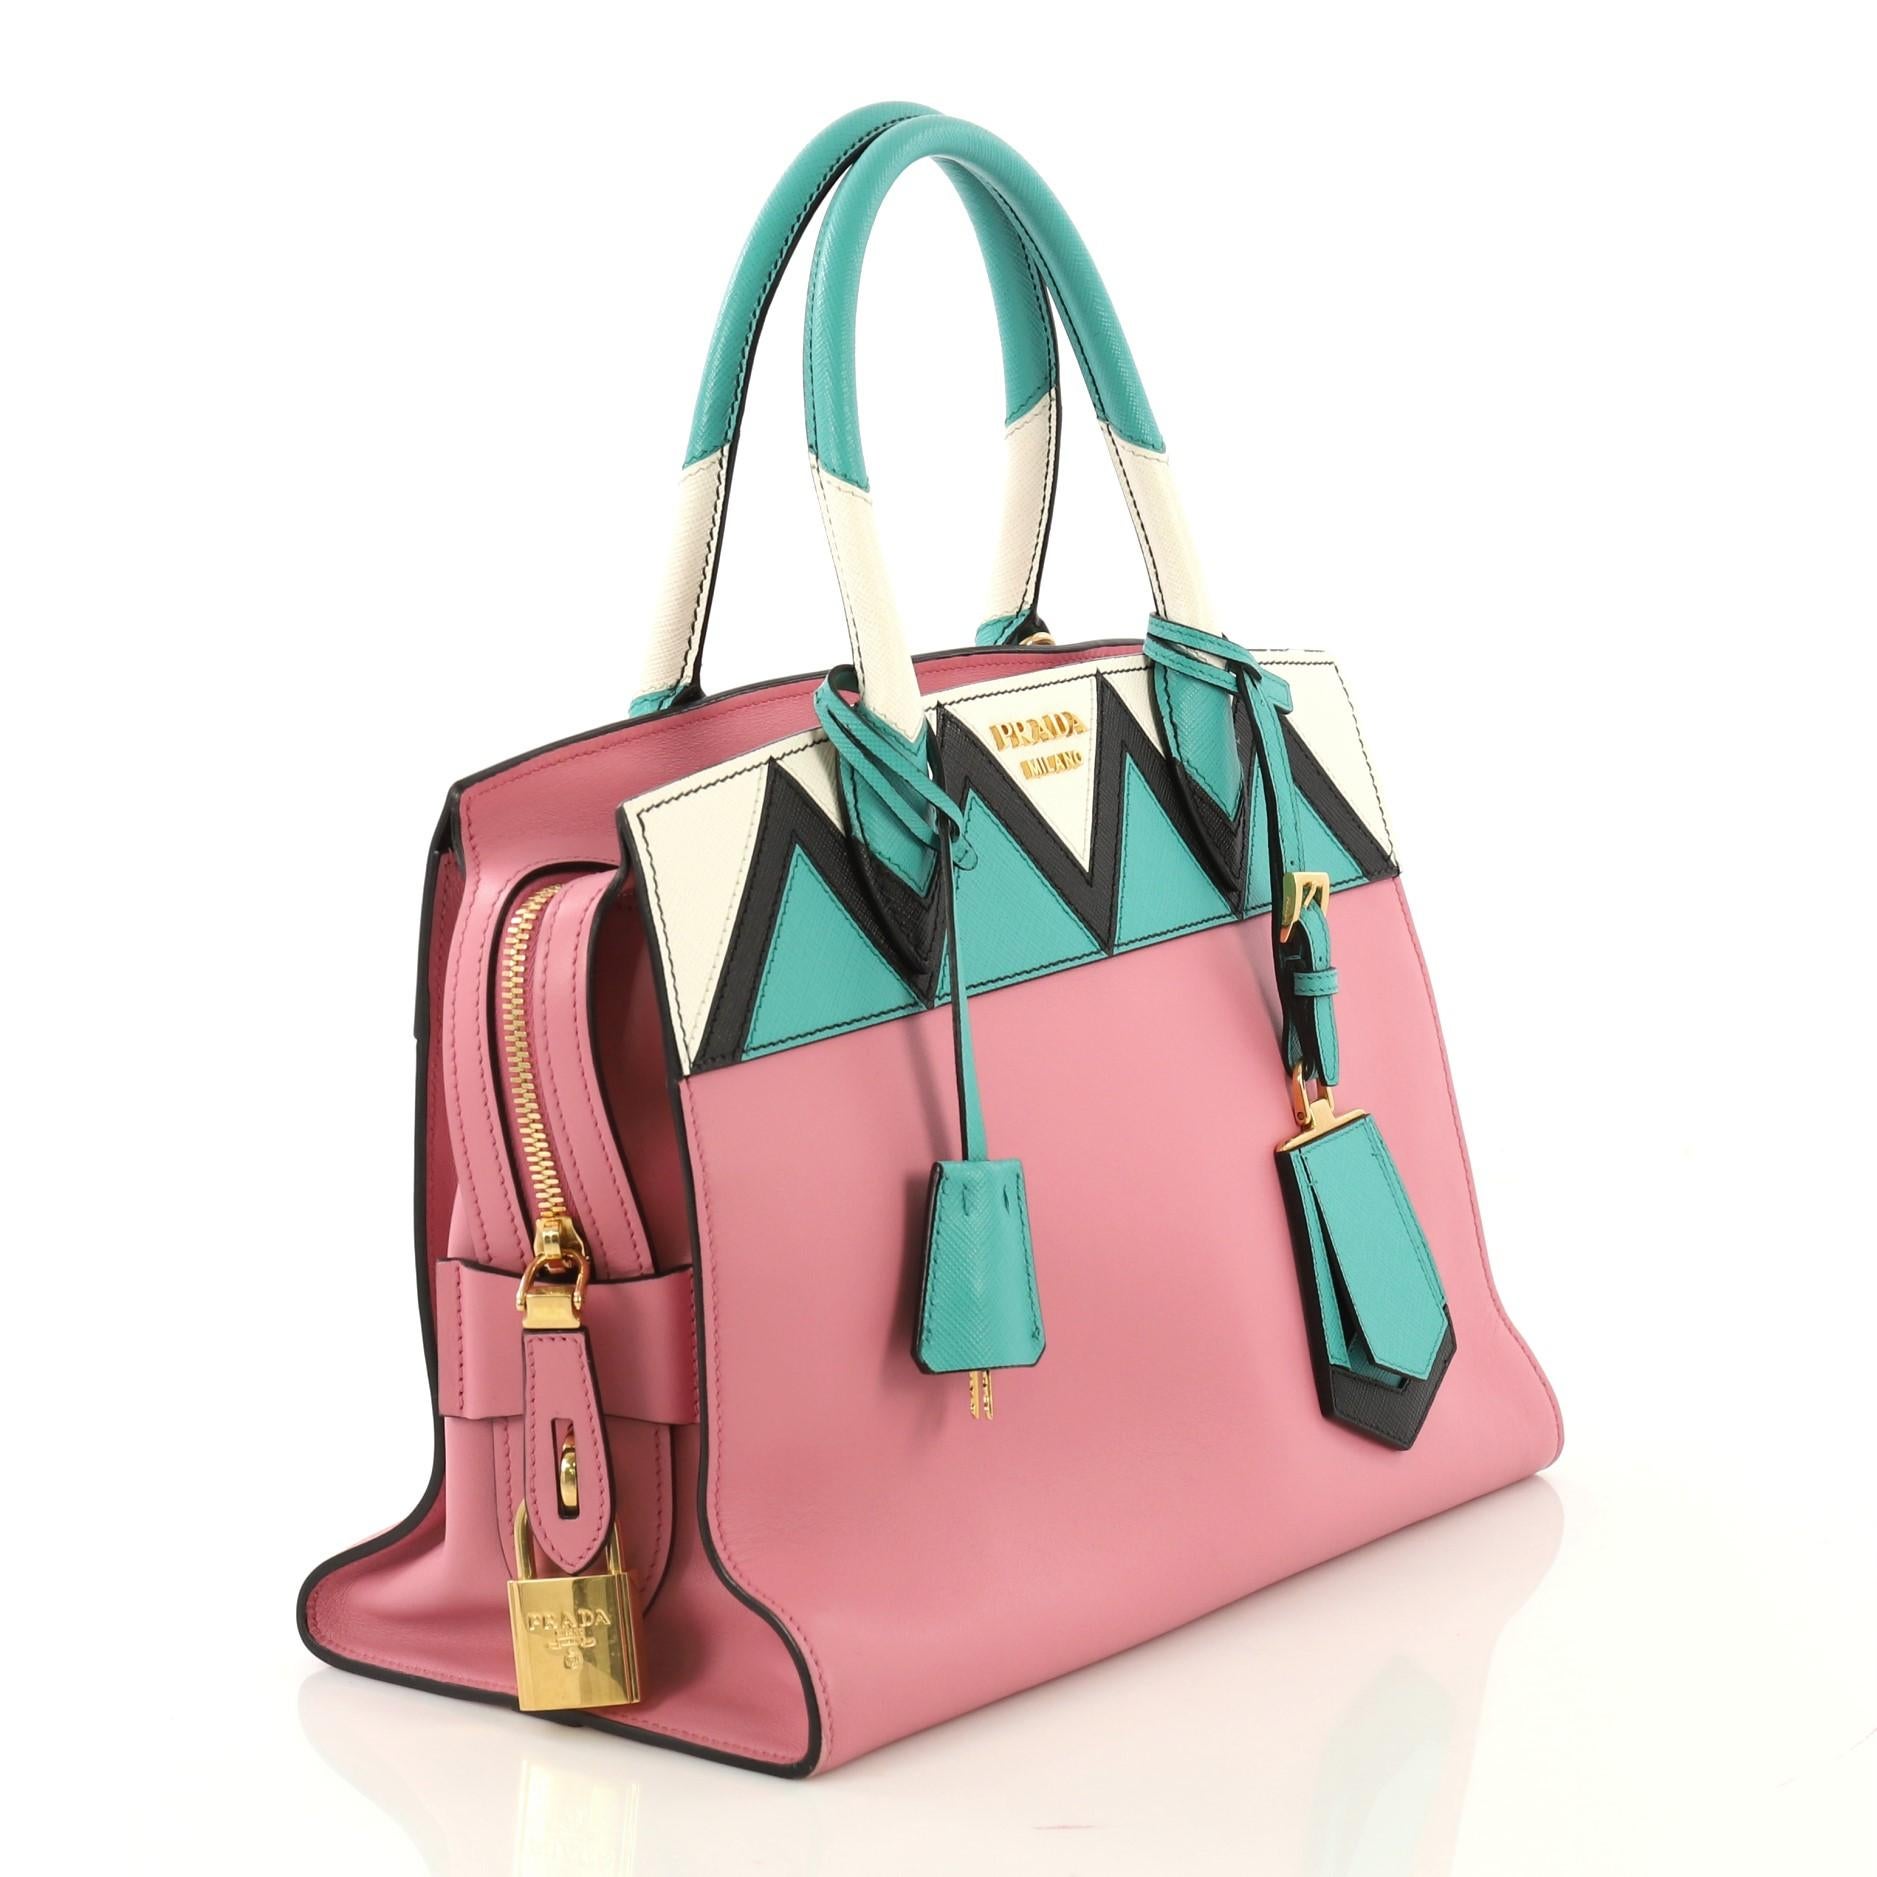 This Prada Esplanade Bag Greca Saffiano with City Calf Medium, crafted in pink saffiano leather with city calfskin, features dual-rolled leather handles, Prada metal logo at center and gold-tone hardware. Its zip closure opens to a black fabric